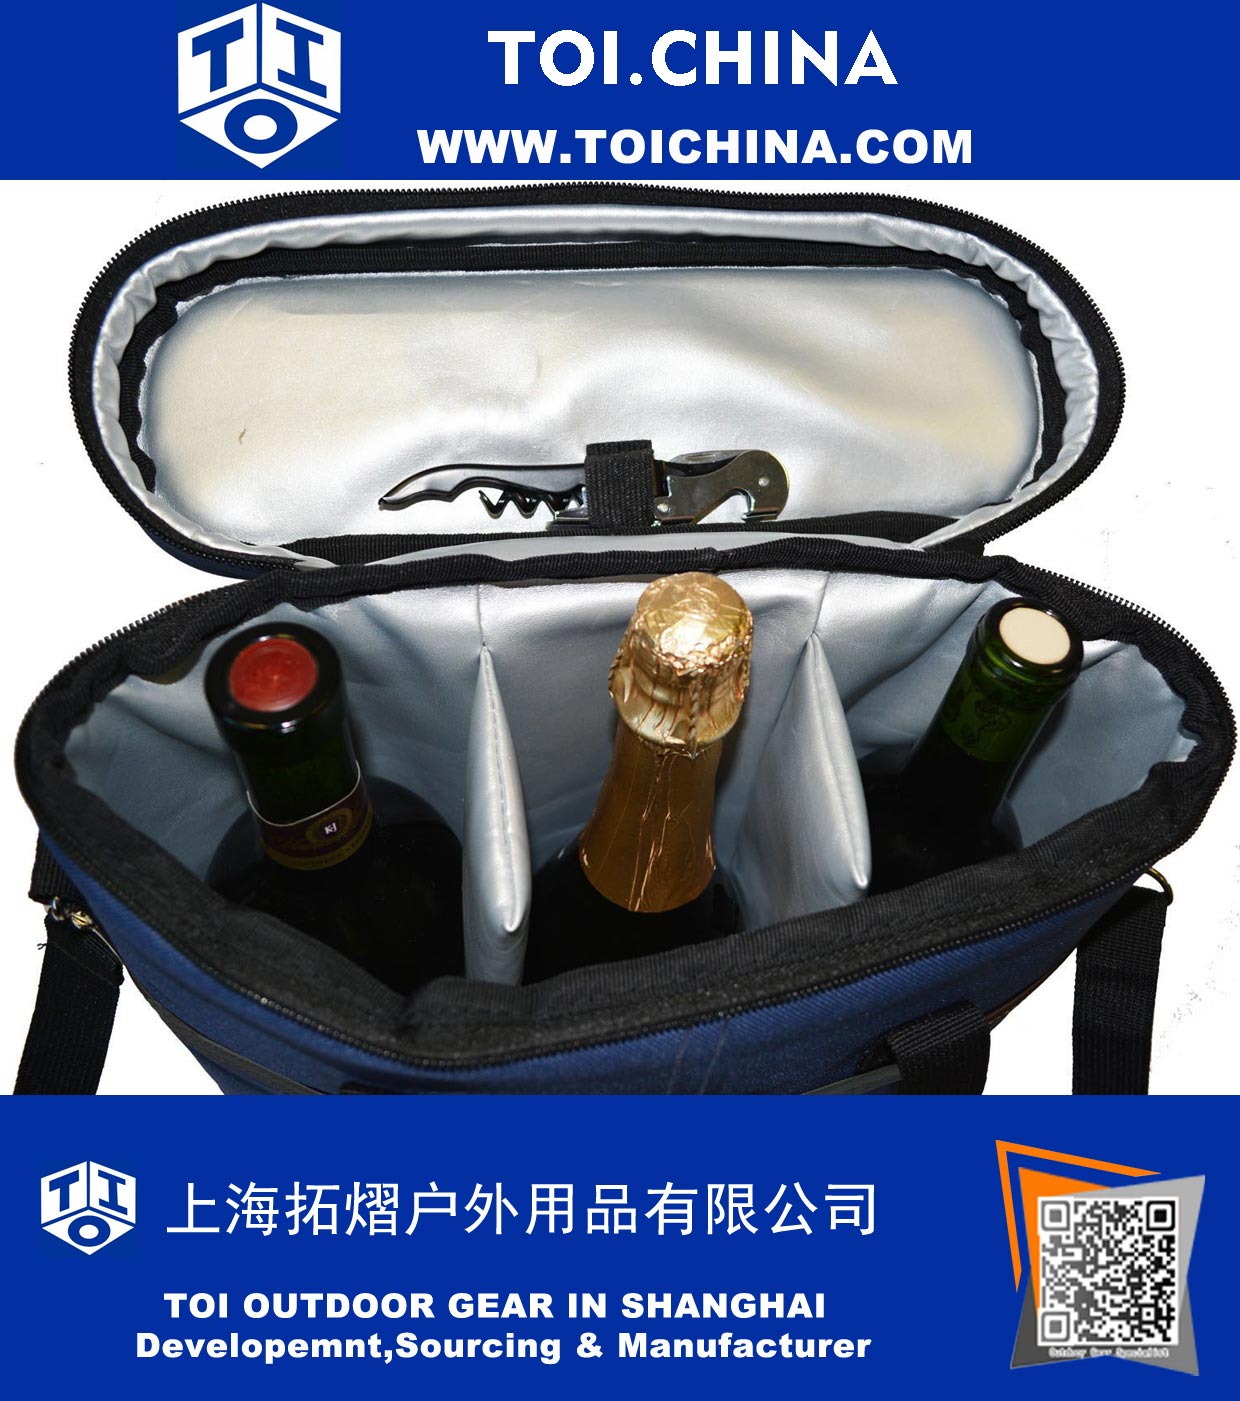 3 Bottle Wine Carrier - Travel Insulated Wine Carrying Case Tote Bag for Champagne Picnic Cooler Dark Navy